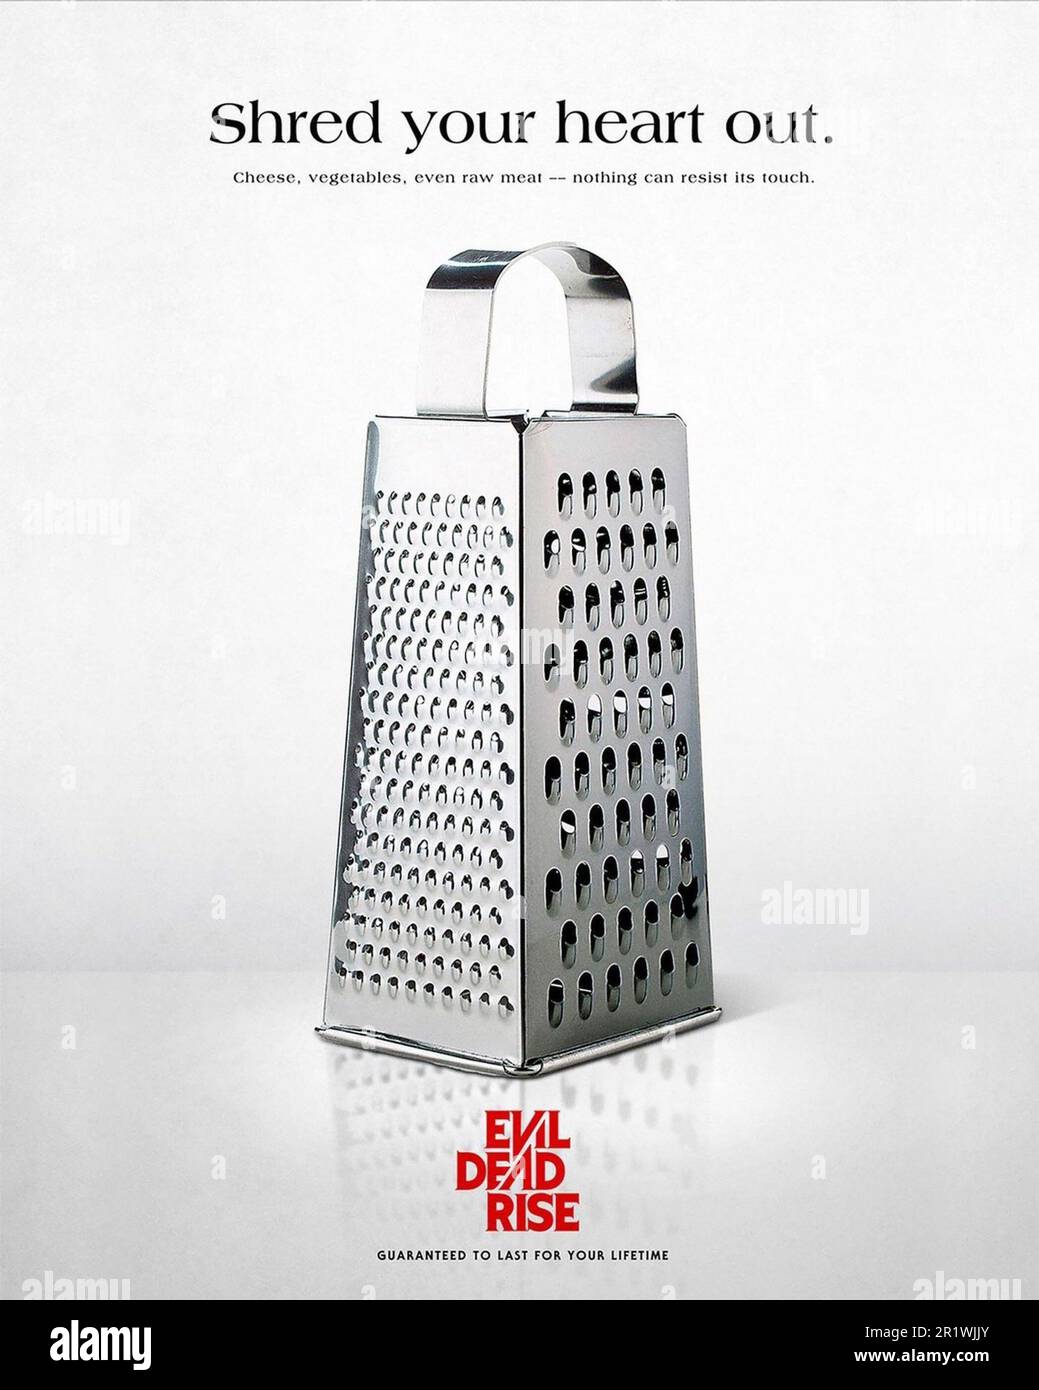 Evil Dead Rise' SXSW Poster from BossLogic Puts the Cheese Grater